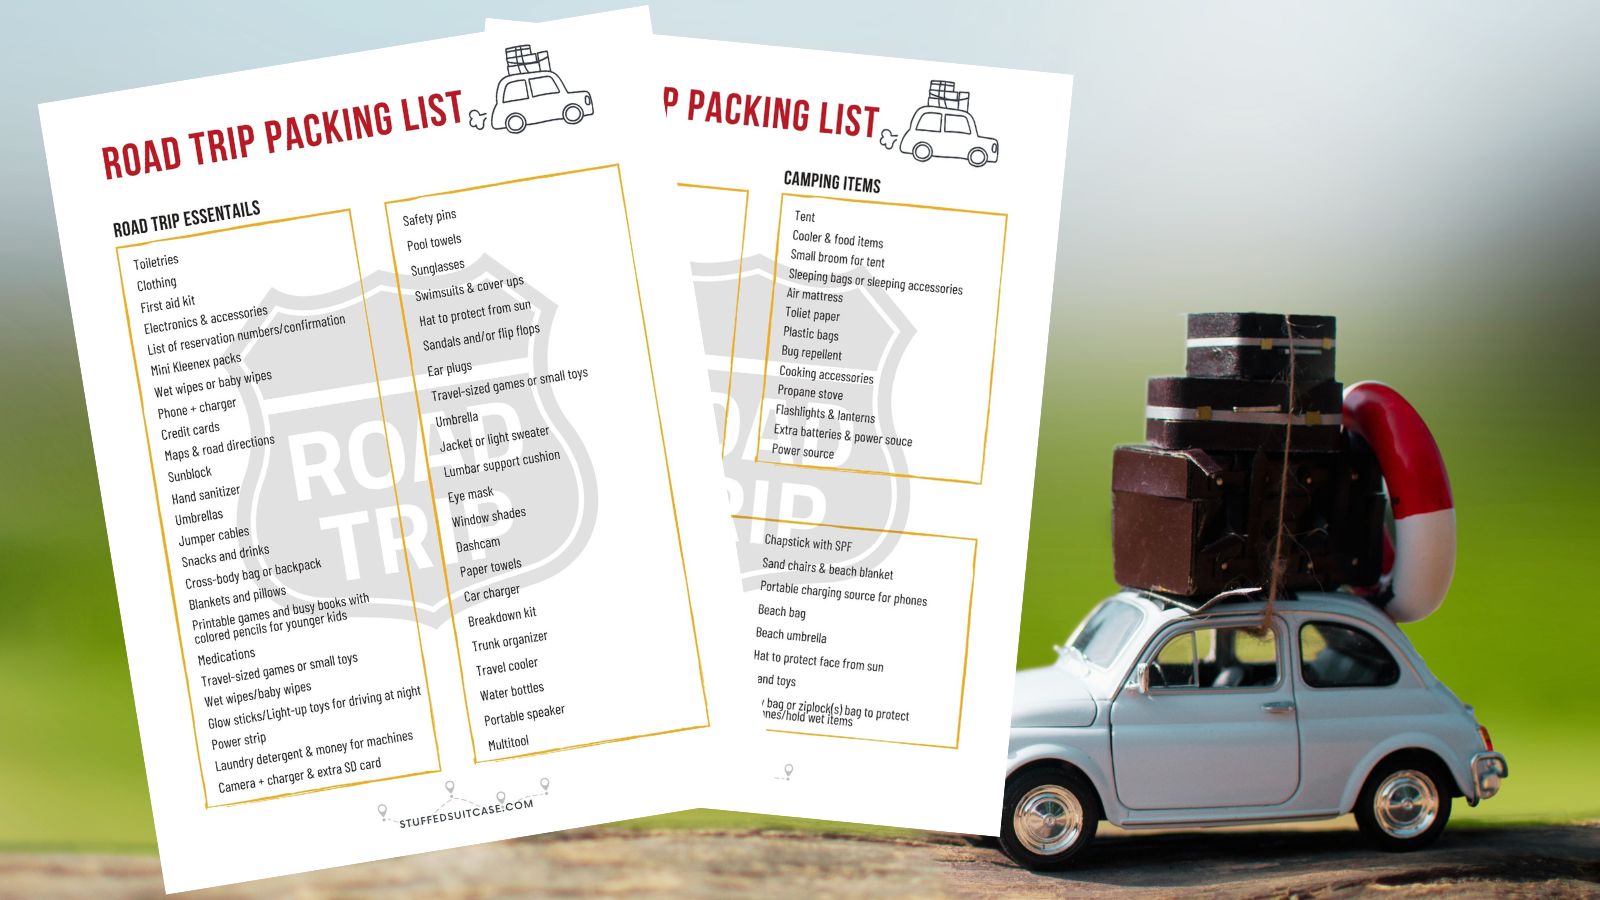 screenshots of road trip packing list printable over image of miniature car